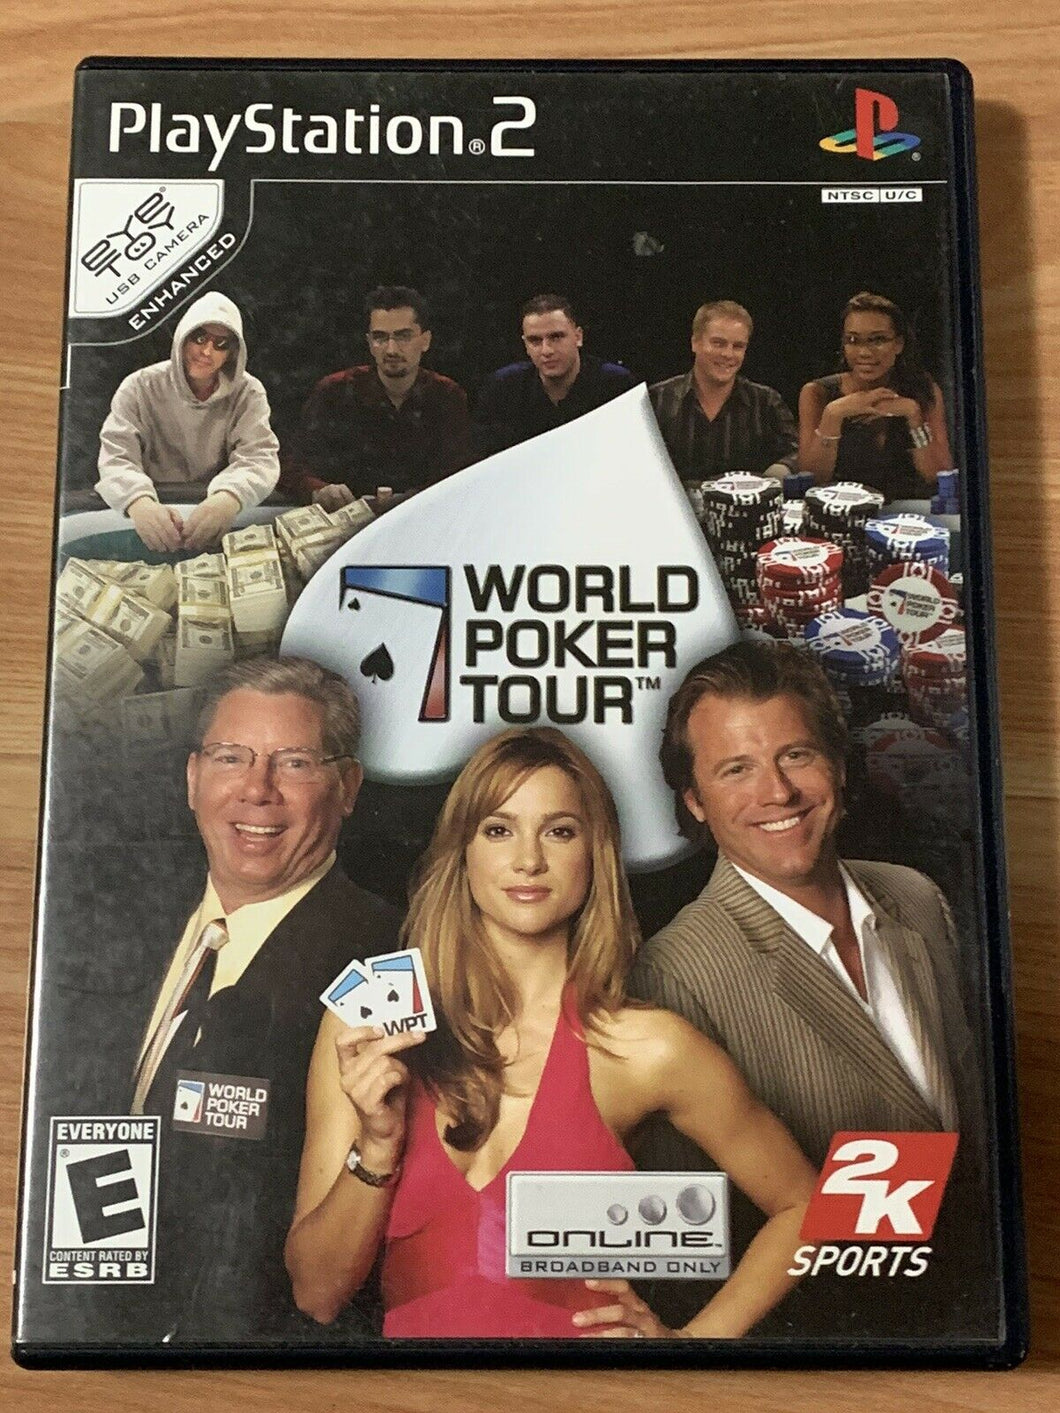 2k Sports: World Poker Tour (PRE-OWNED)